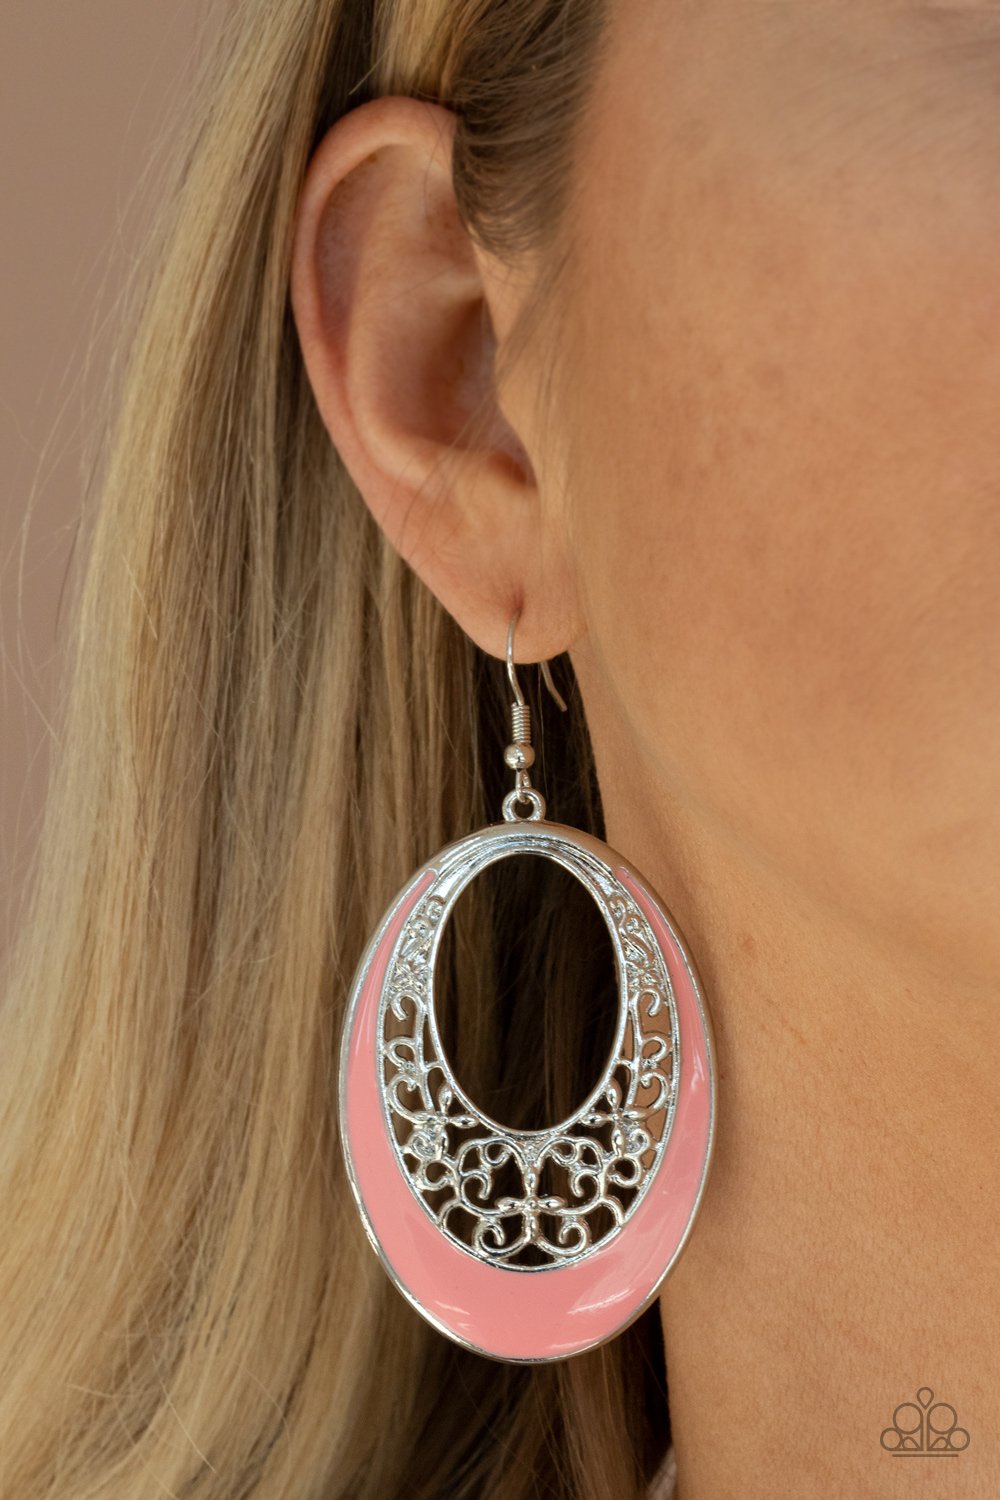 Orchard Bliss- Orange and Silver Earrings